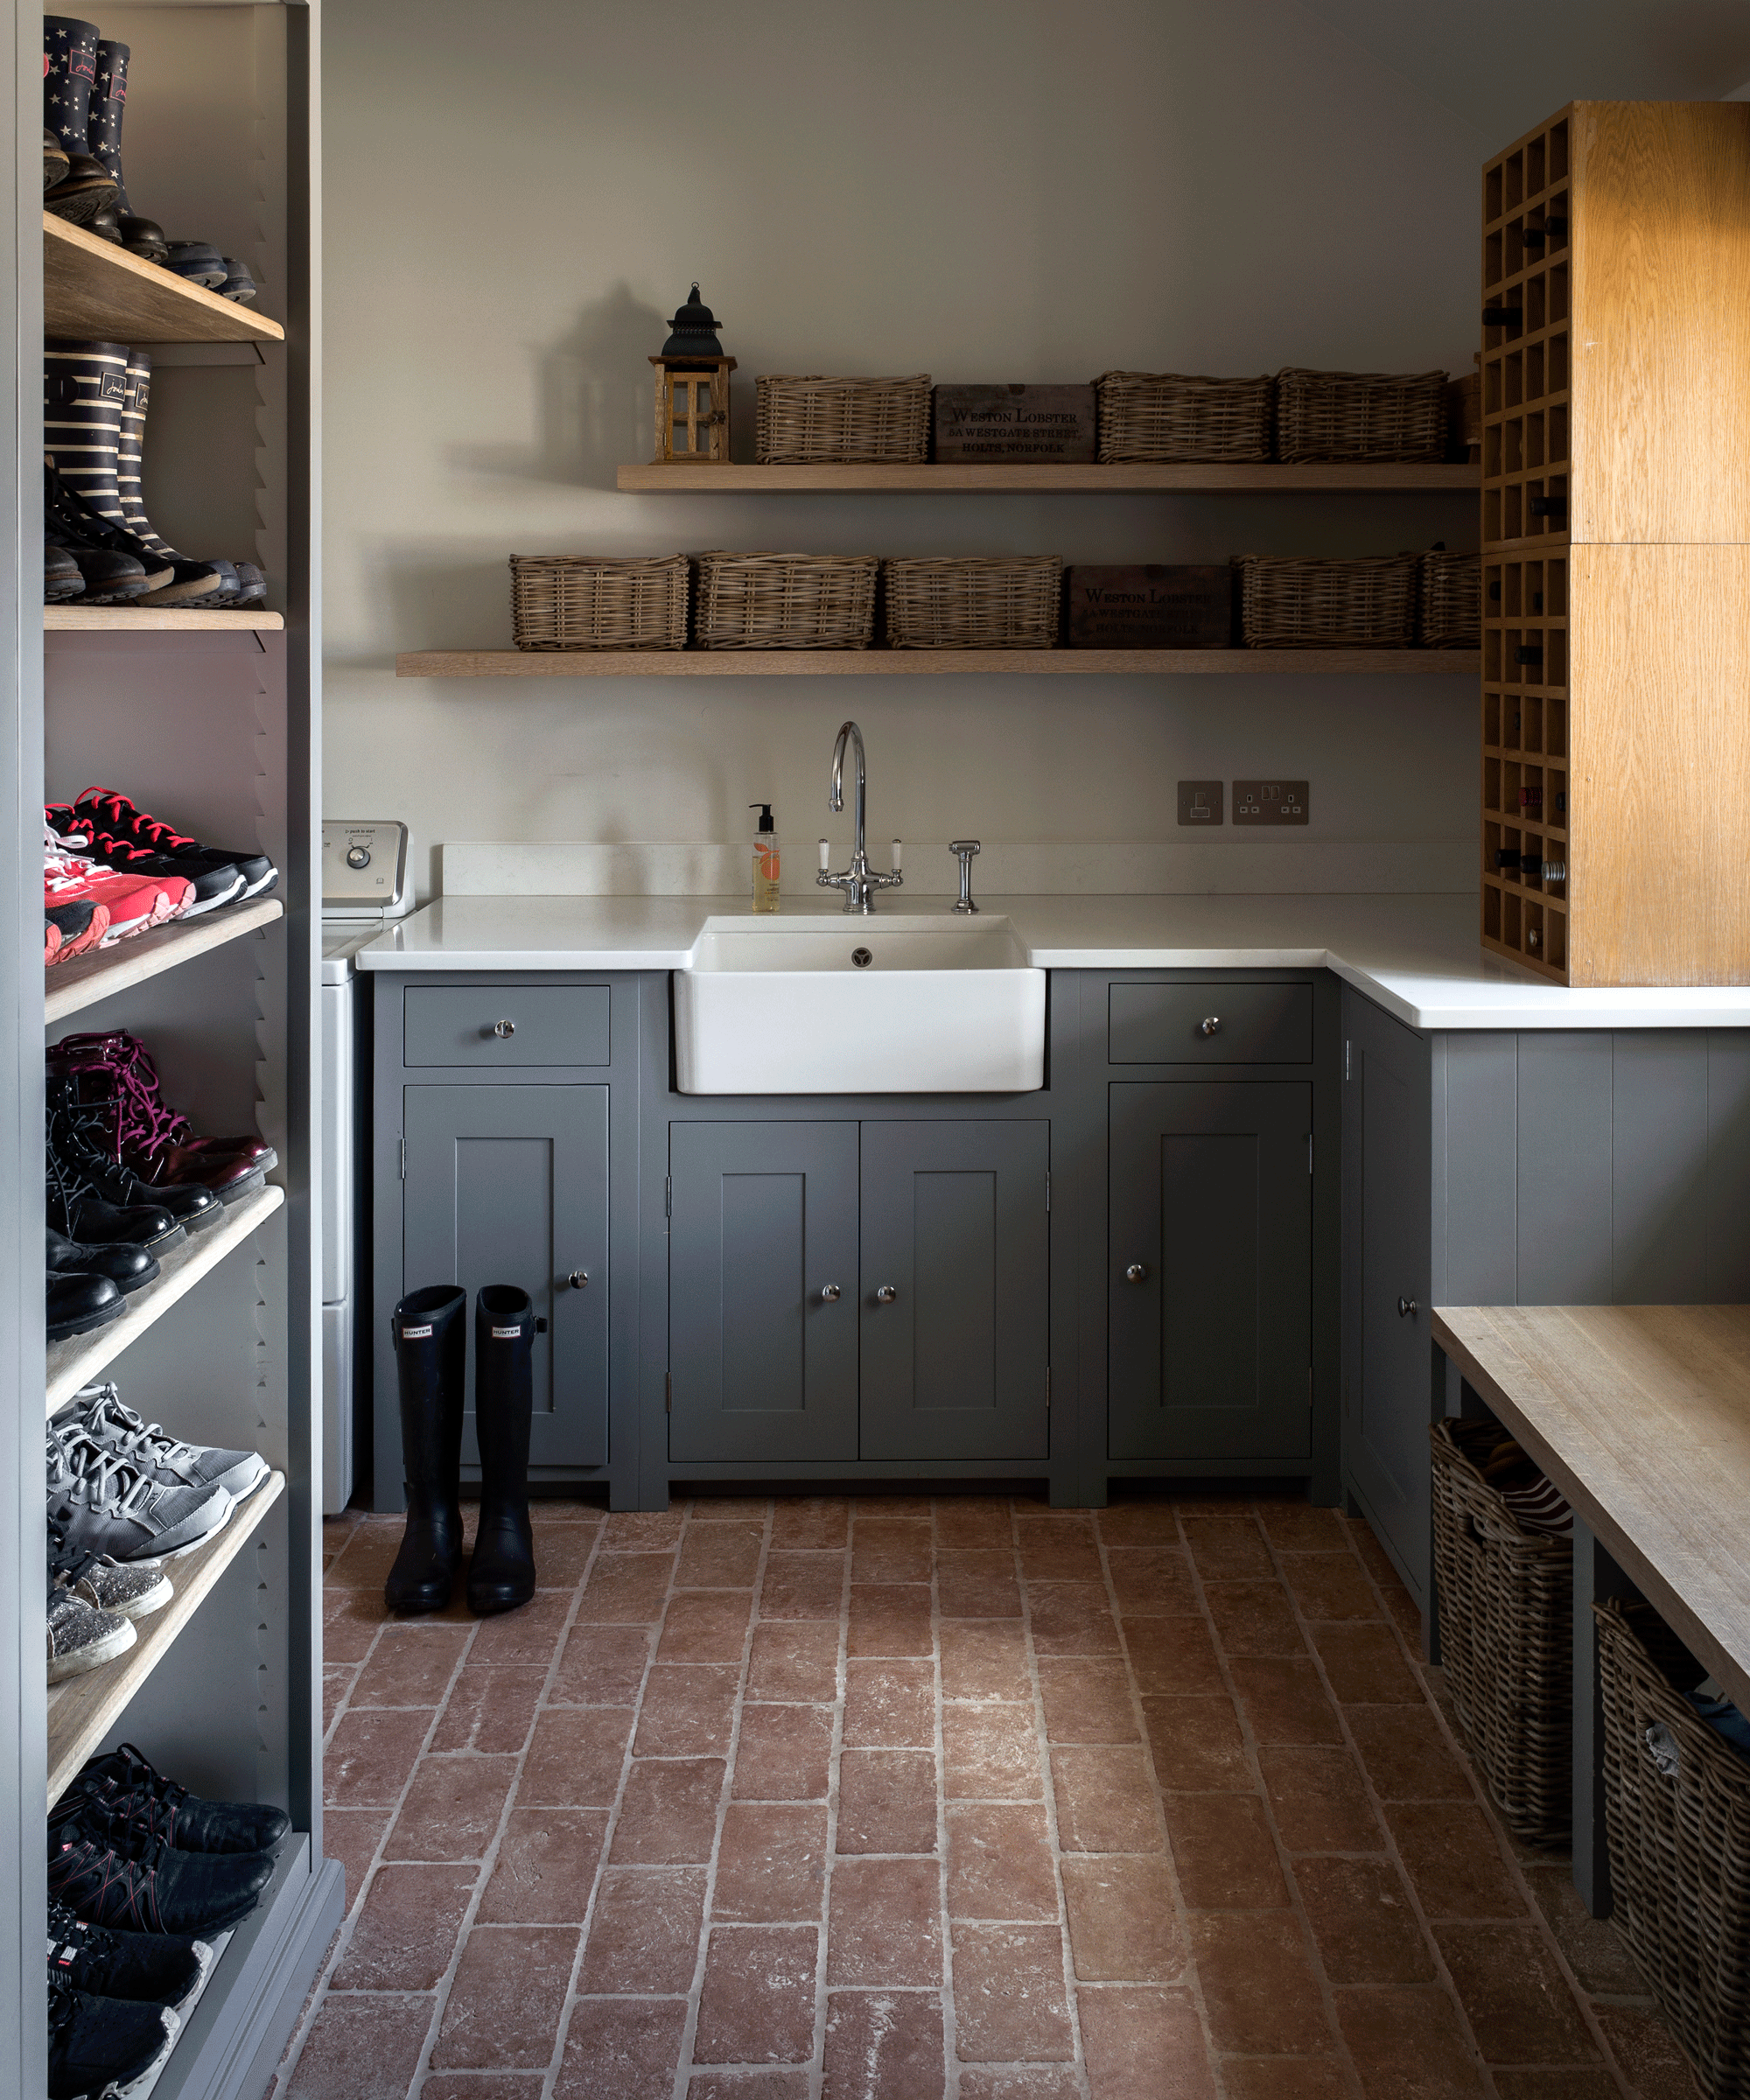 Utility room with grey cabinetry, shoe storage and brick flooring